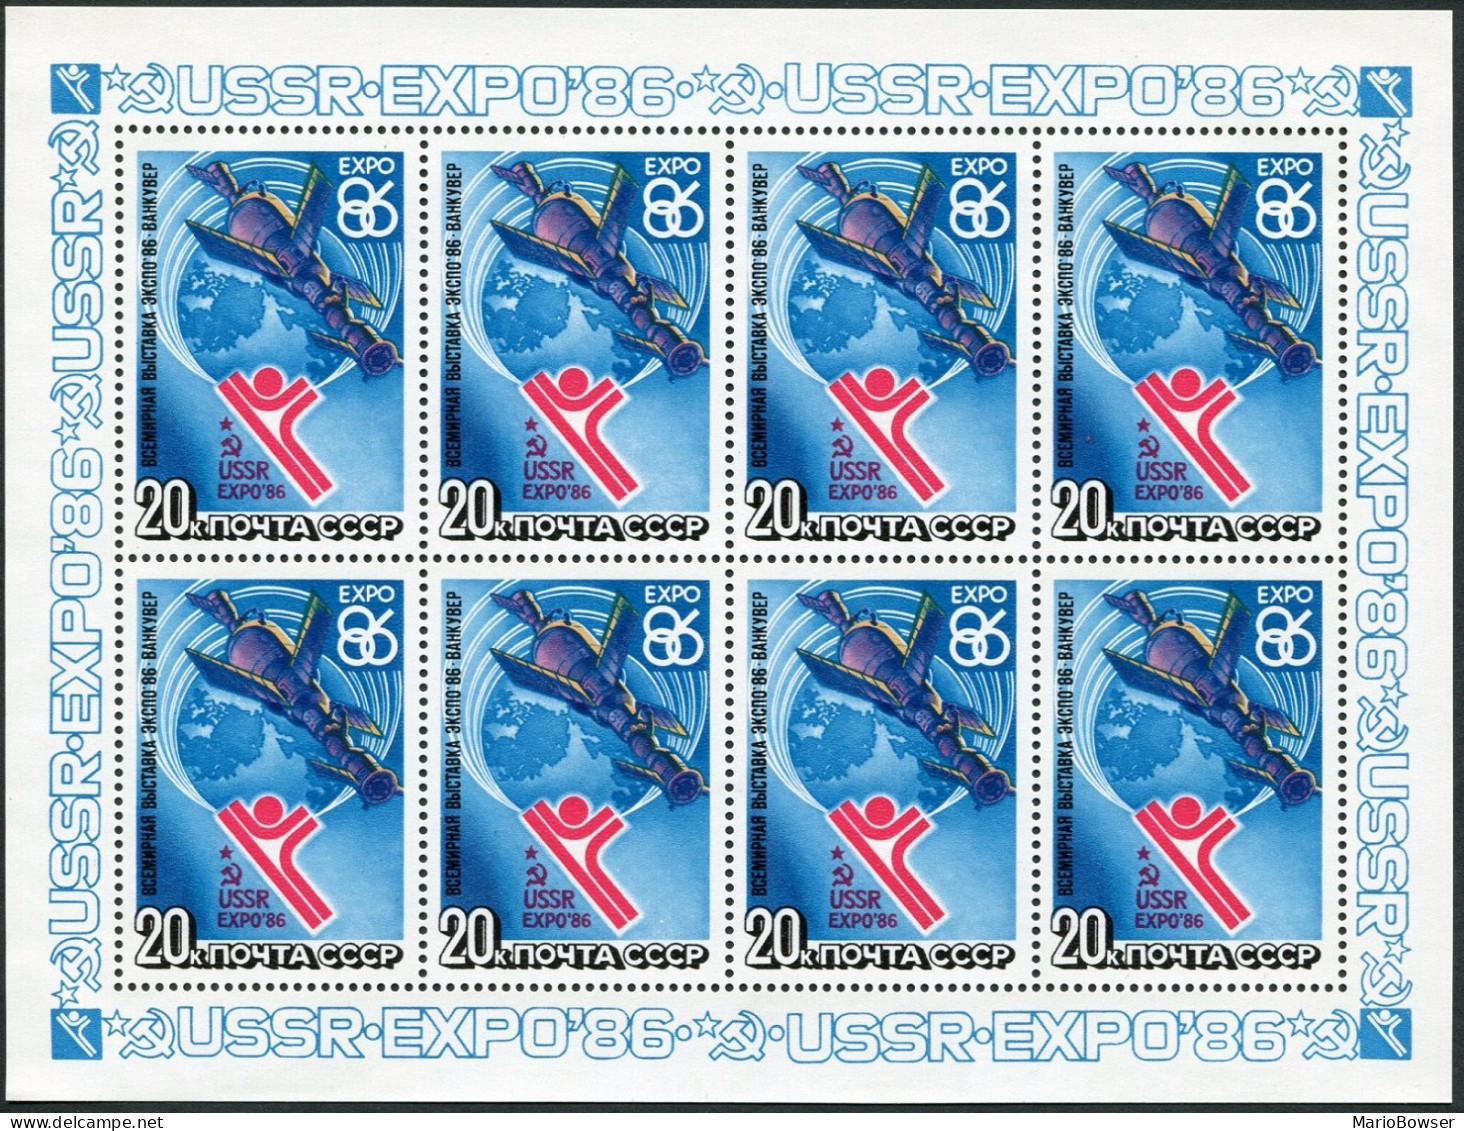 Russia 5440a Sheet, MNH. Michel 5589 Klb. EXPO-1986, Vancouver. Space Station. - Nuovi